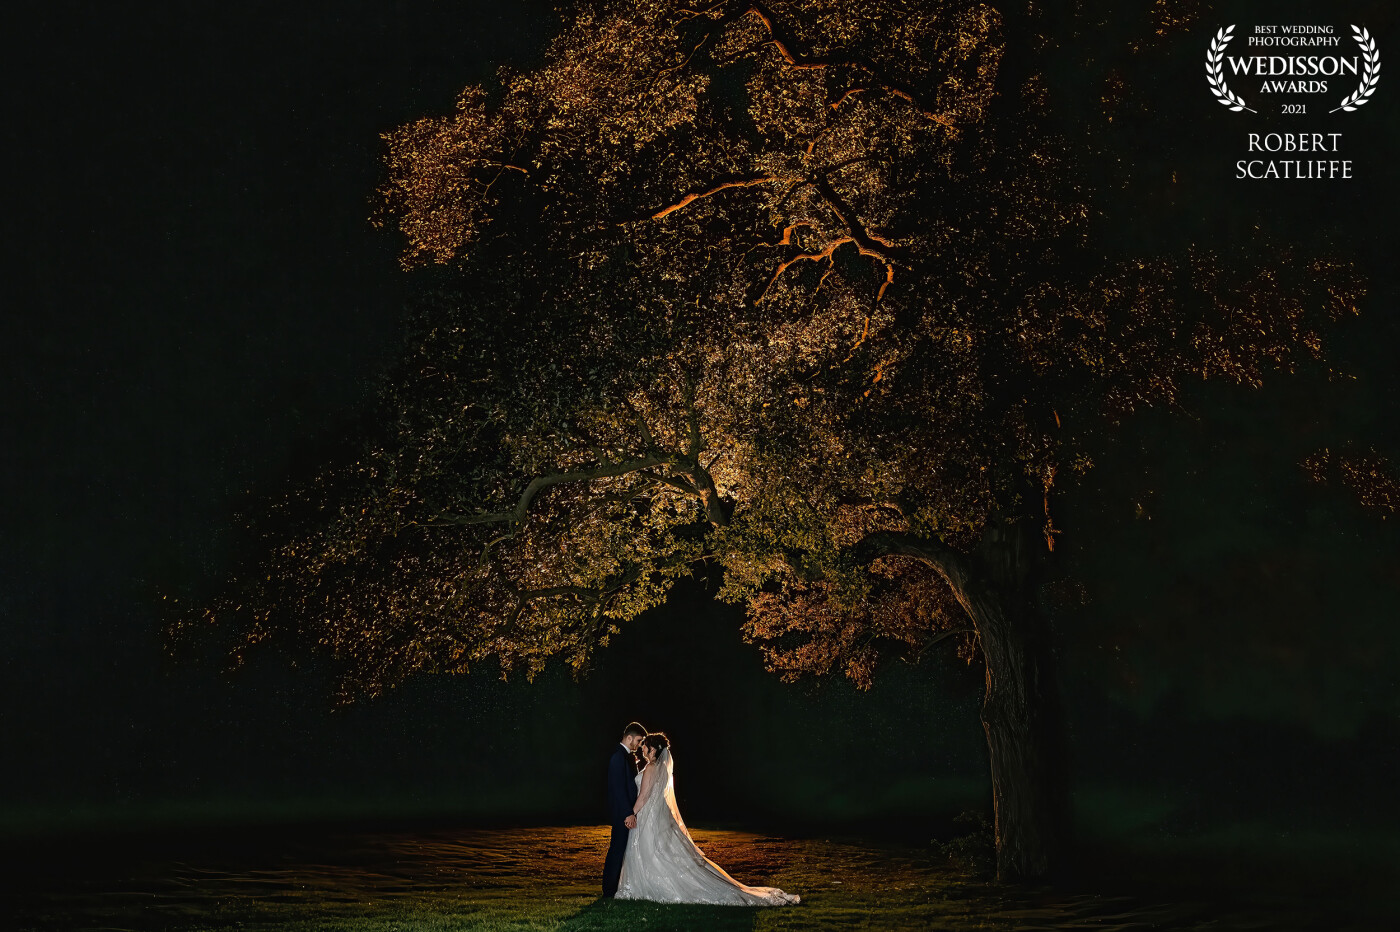 Laura & Aaron were keen to break away from their guests & help create some stunning night time shots to remember, I had my eye on this tree during the day & knew it would work perfectly for this shot !